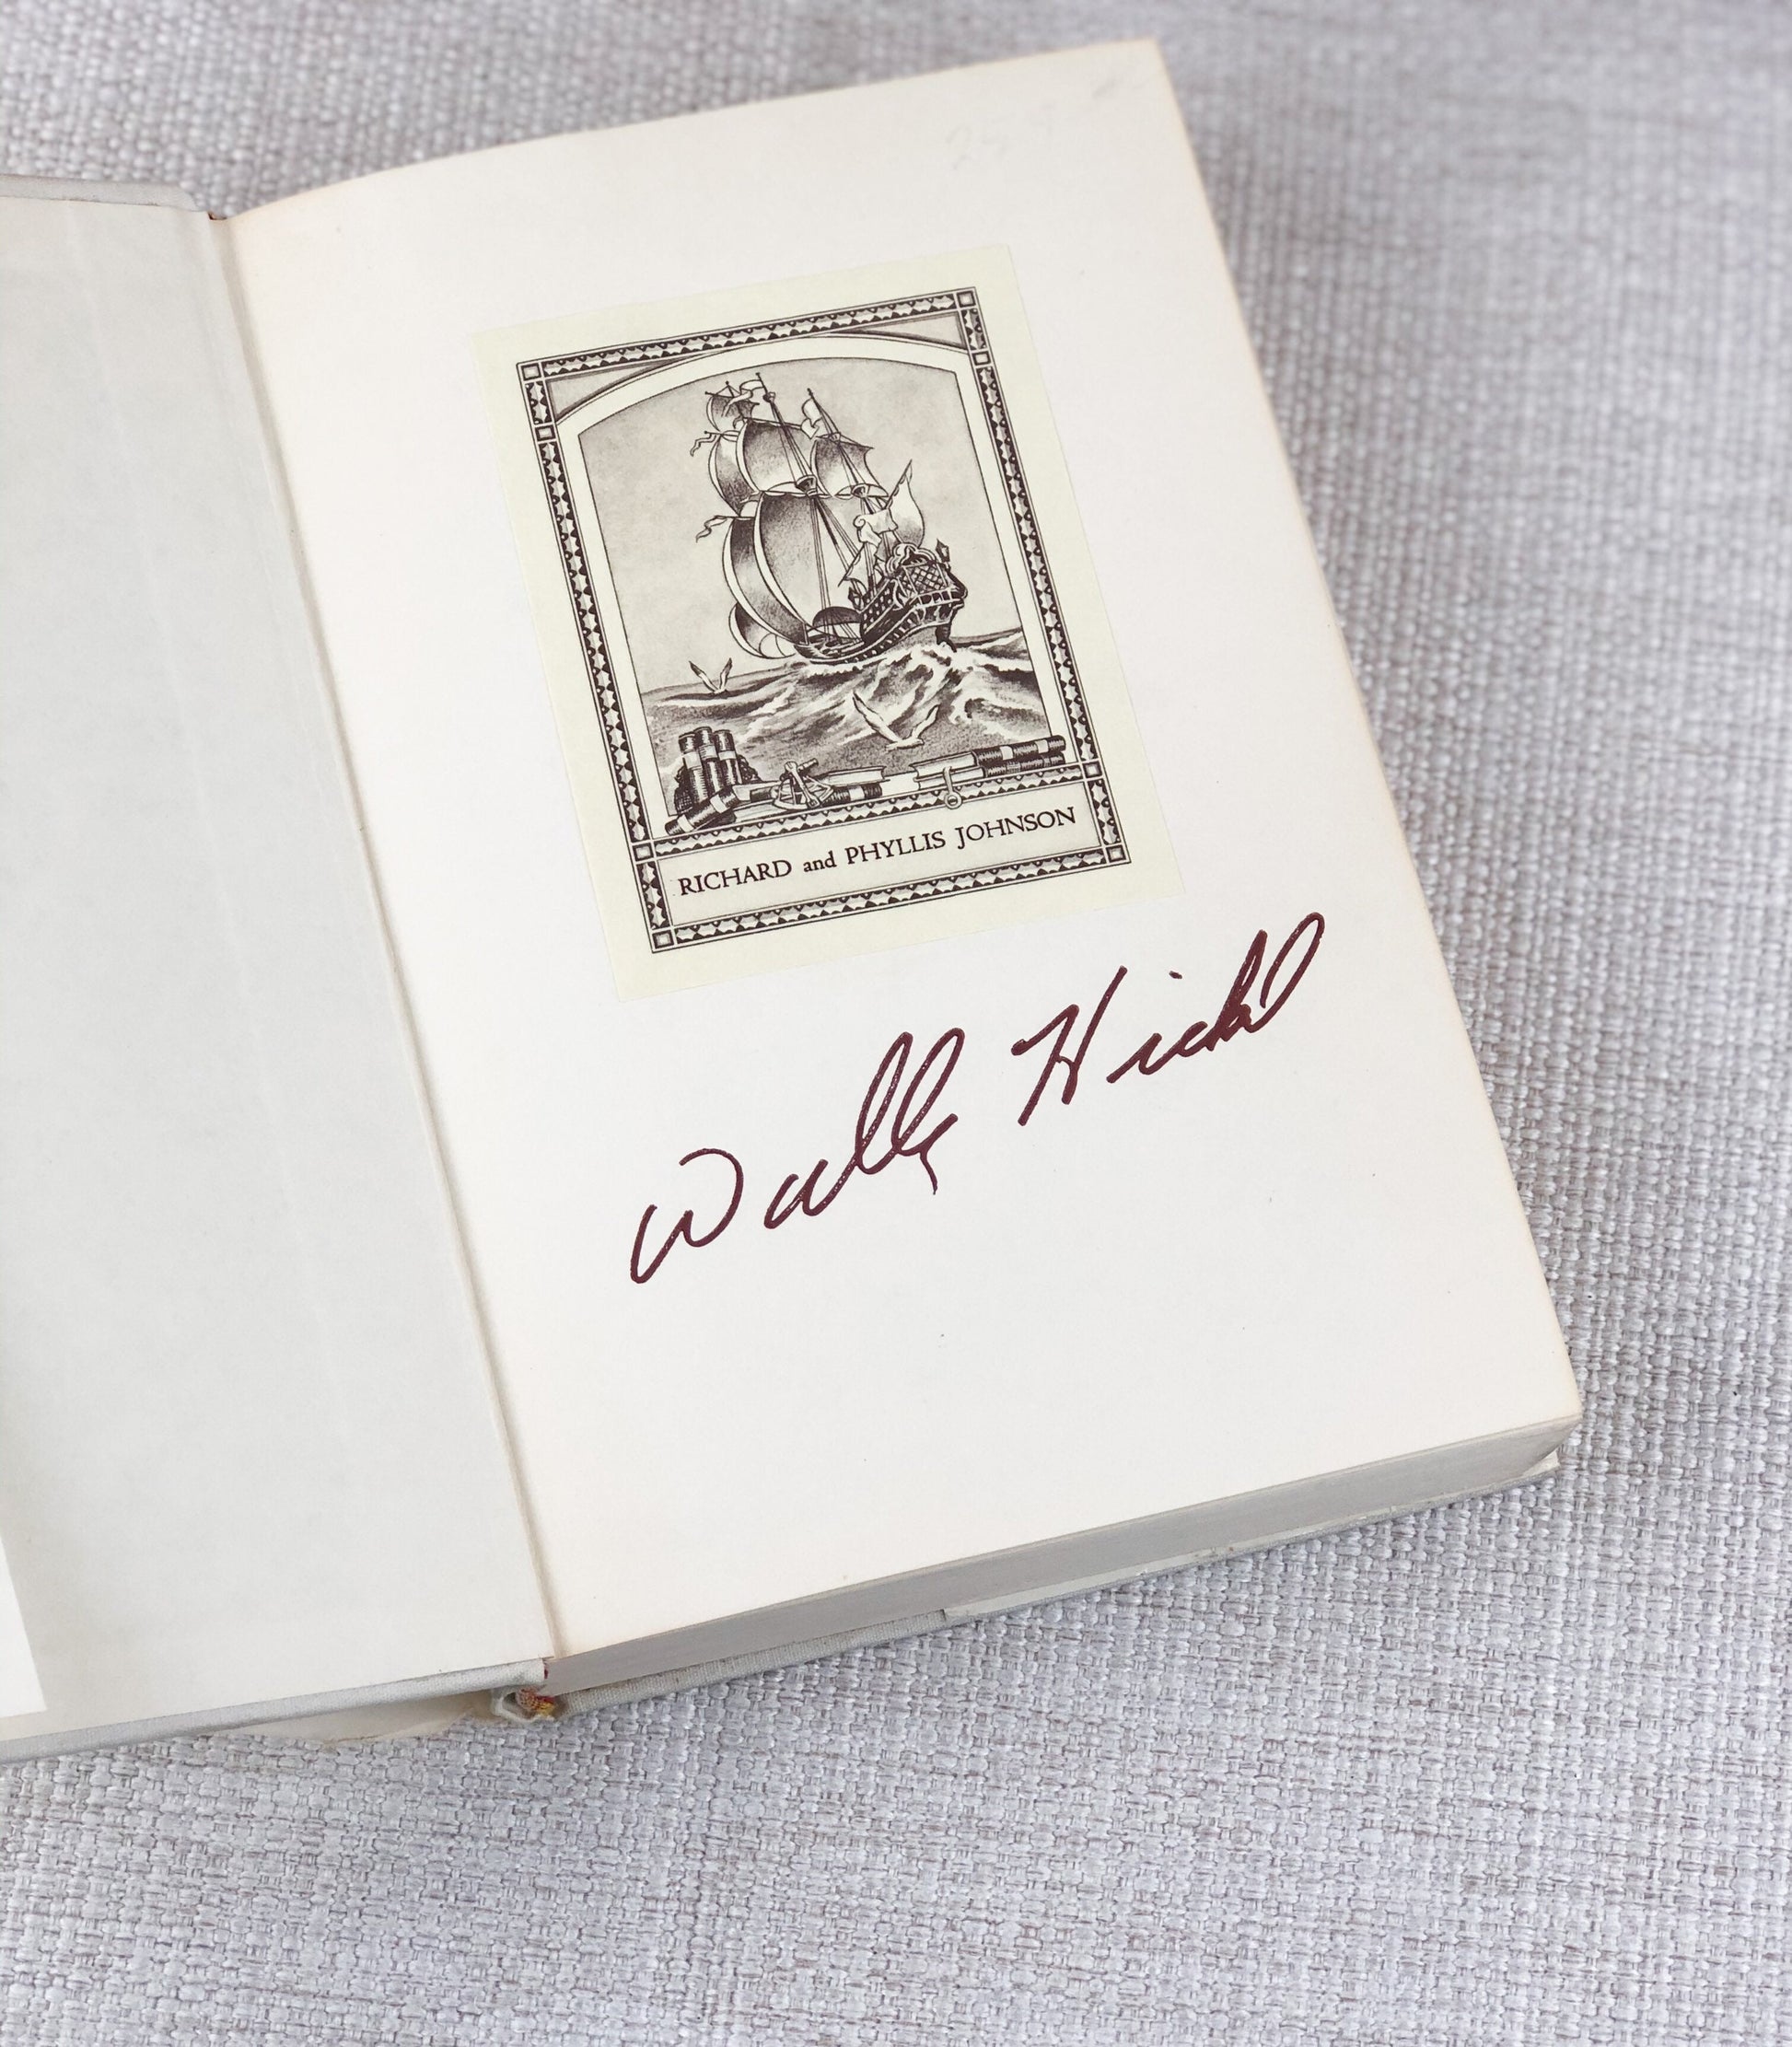 Signed Book by Walter J Hickel